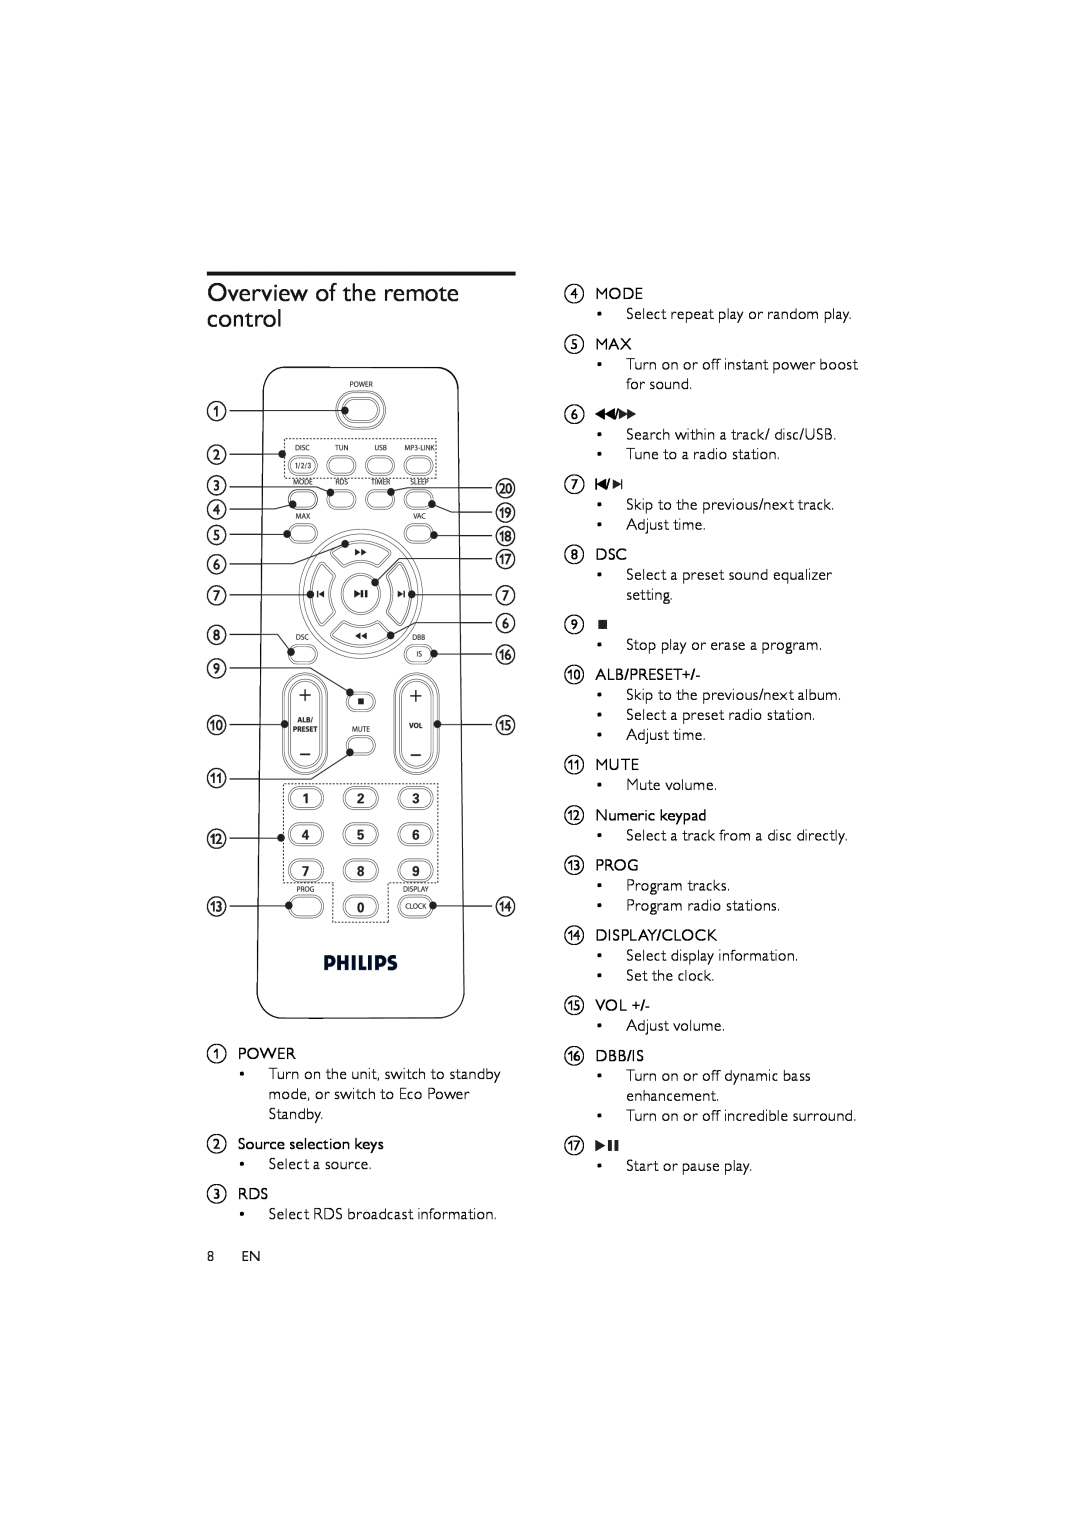 Philips FWM387/12 user manual Overview of the remote control, 8 EN 